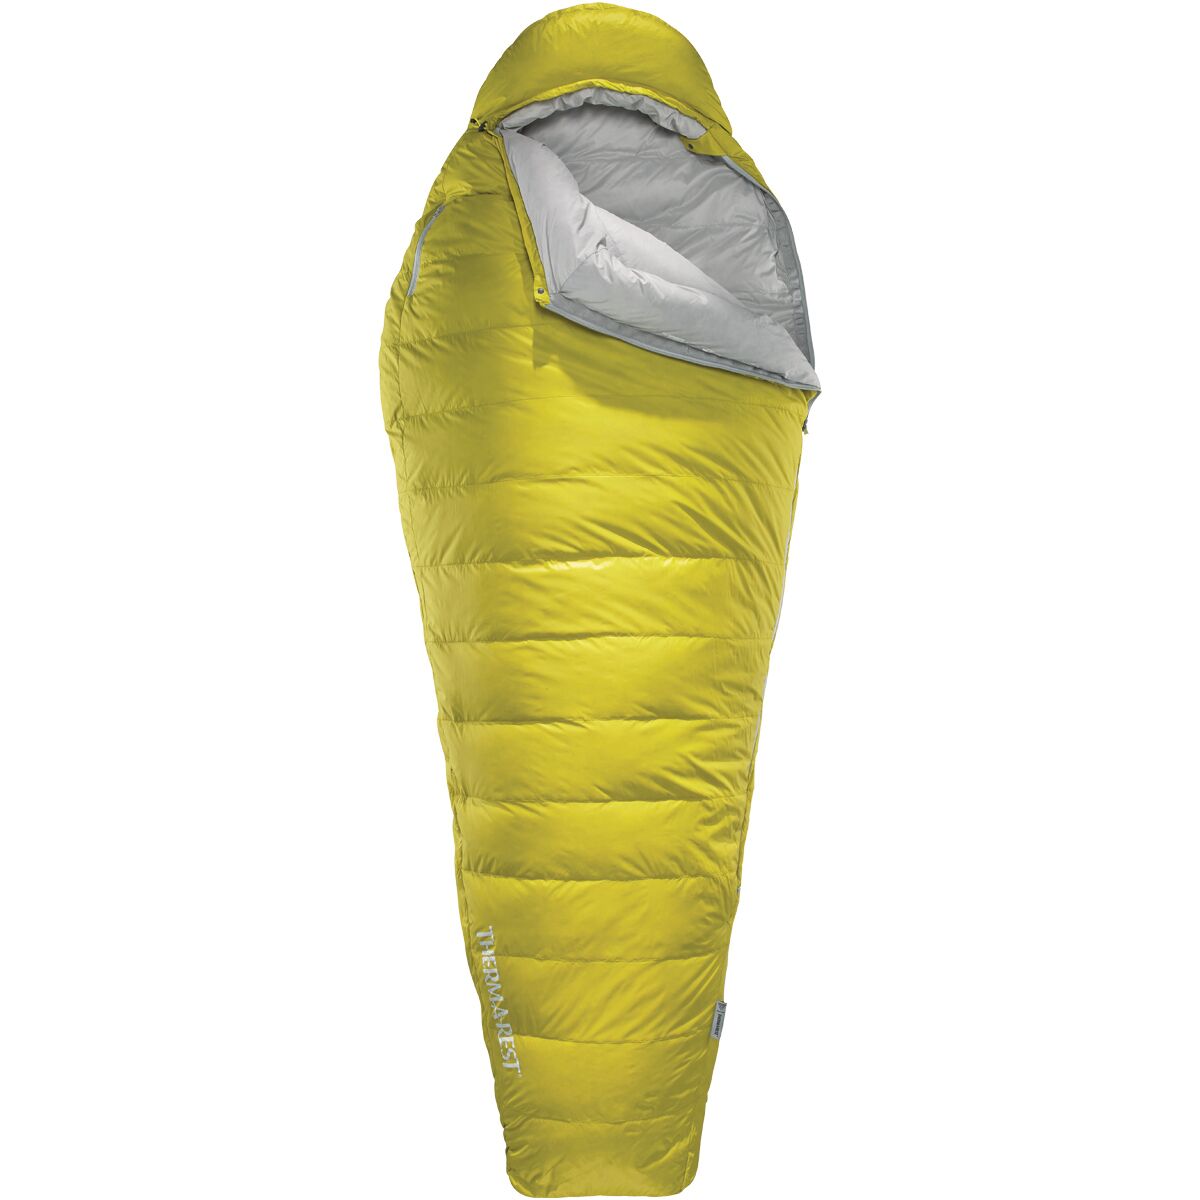 Therm-a-Rest Parsec Sleeping Bag: 32F Down